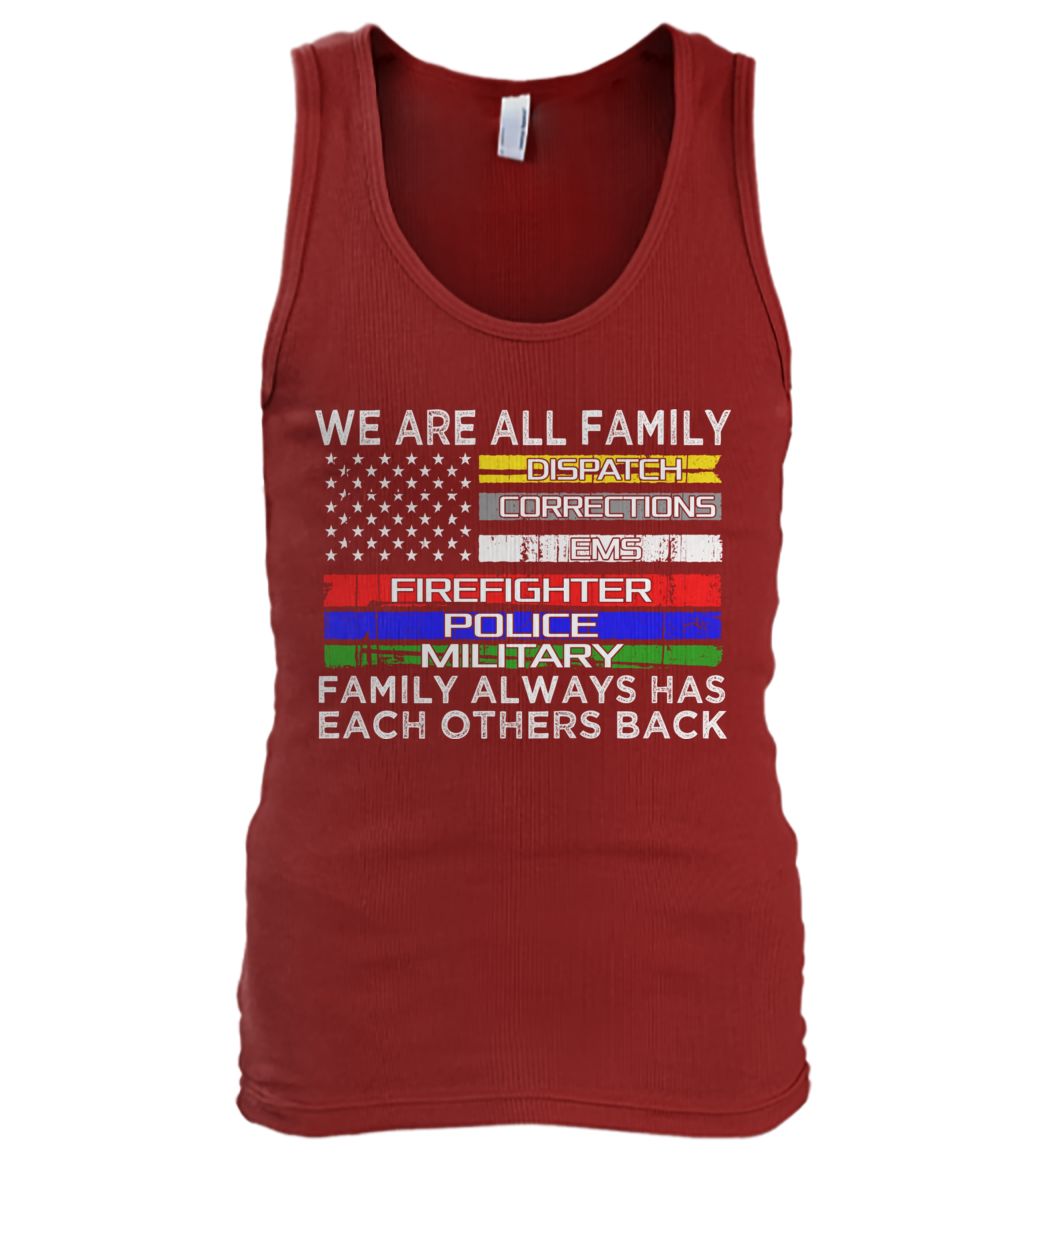 We are all family dispatch corrections emt firefighter police military men's tank top